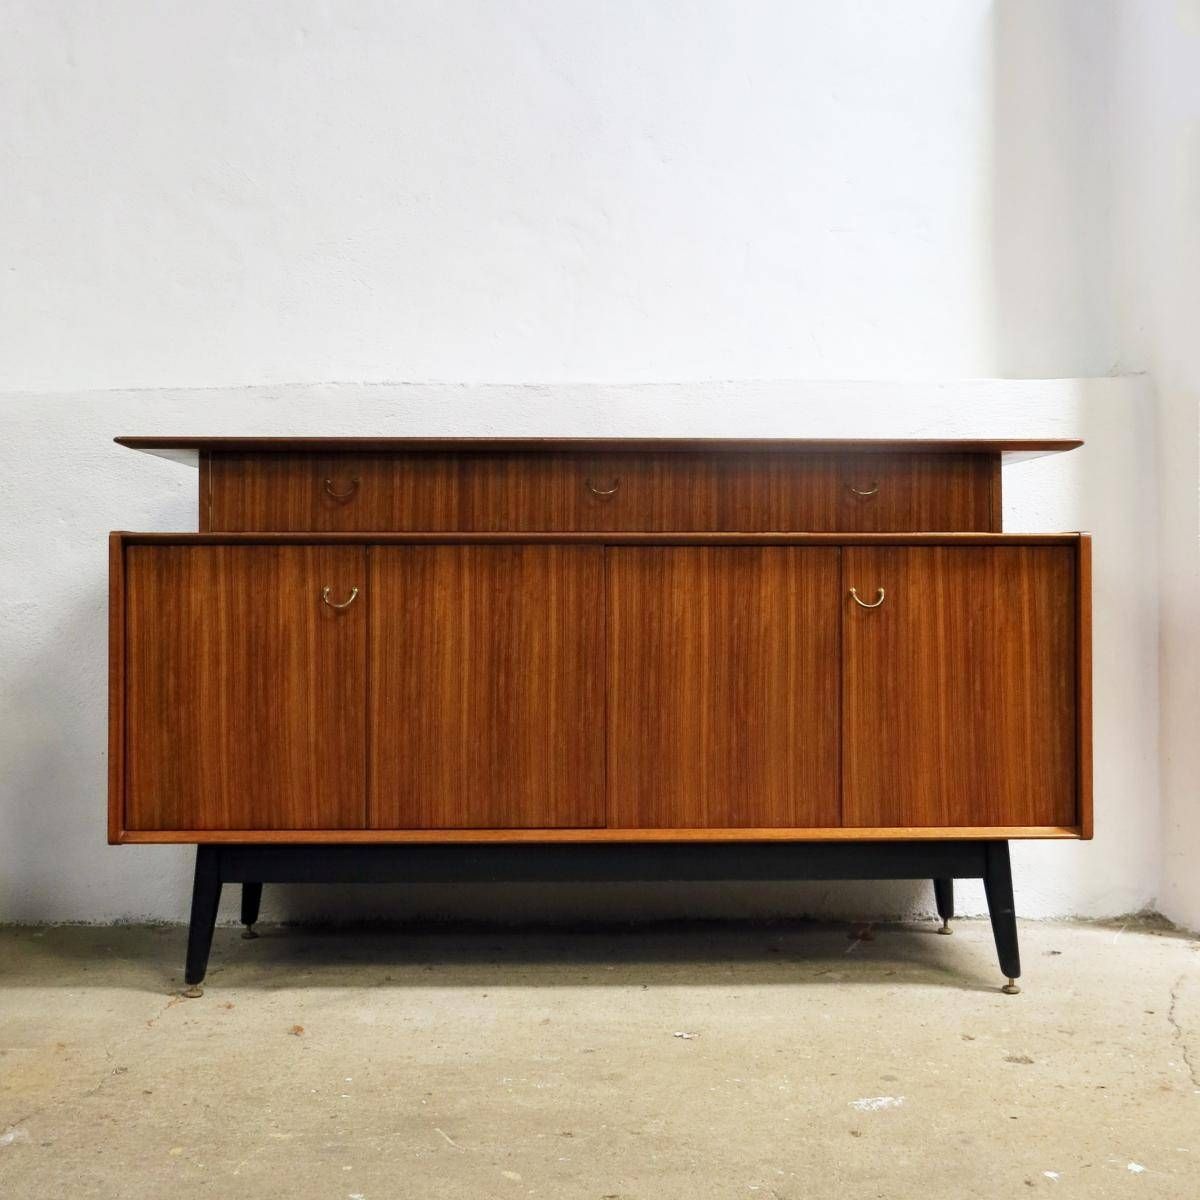 British Sideboard From G Plan, 1950s For Sale At Pamono Regarding 2017 G Plan Sideboards (View 7 of 15)